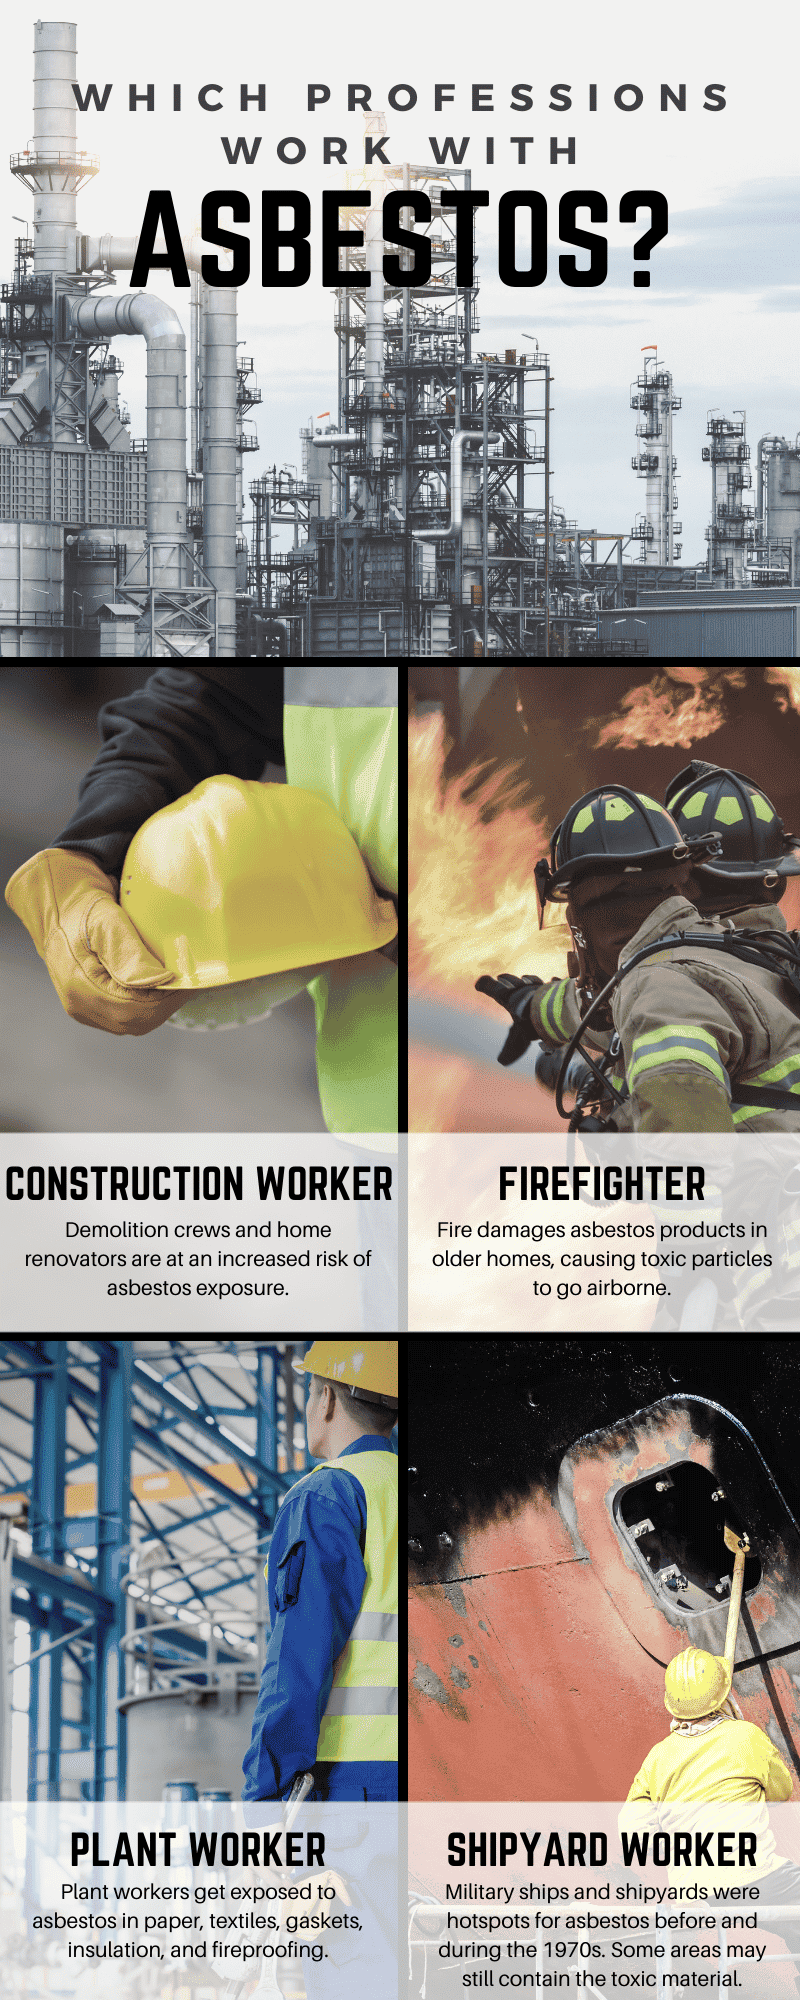 Which Professions Work with Asbestos? [INFOGRAPHIC]